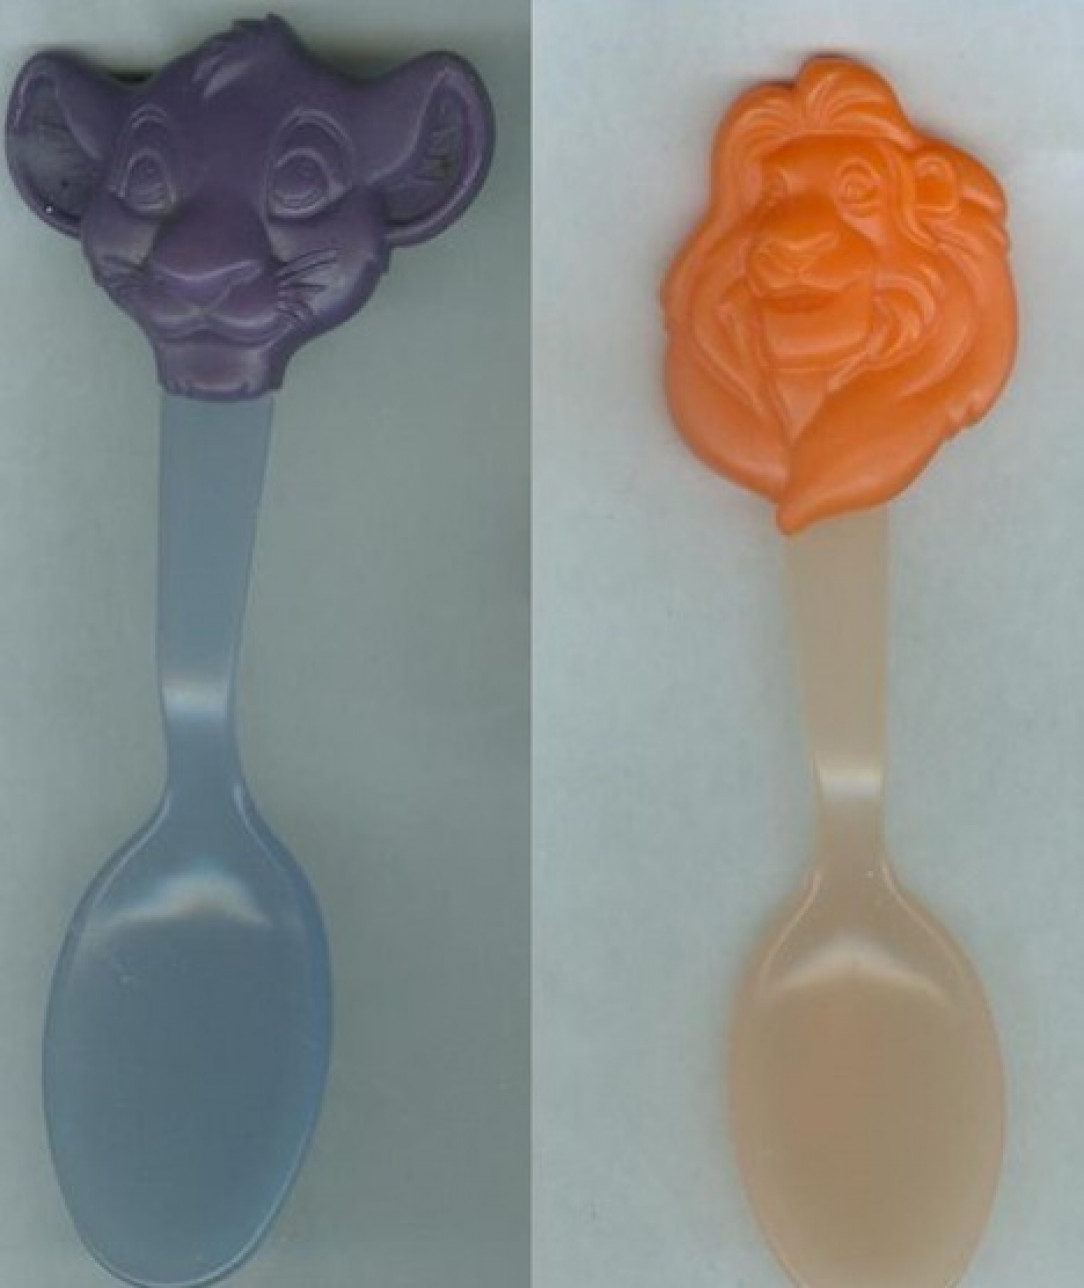 Lion King Spoons